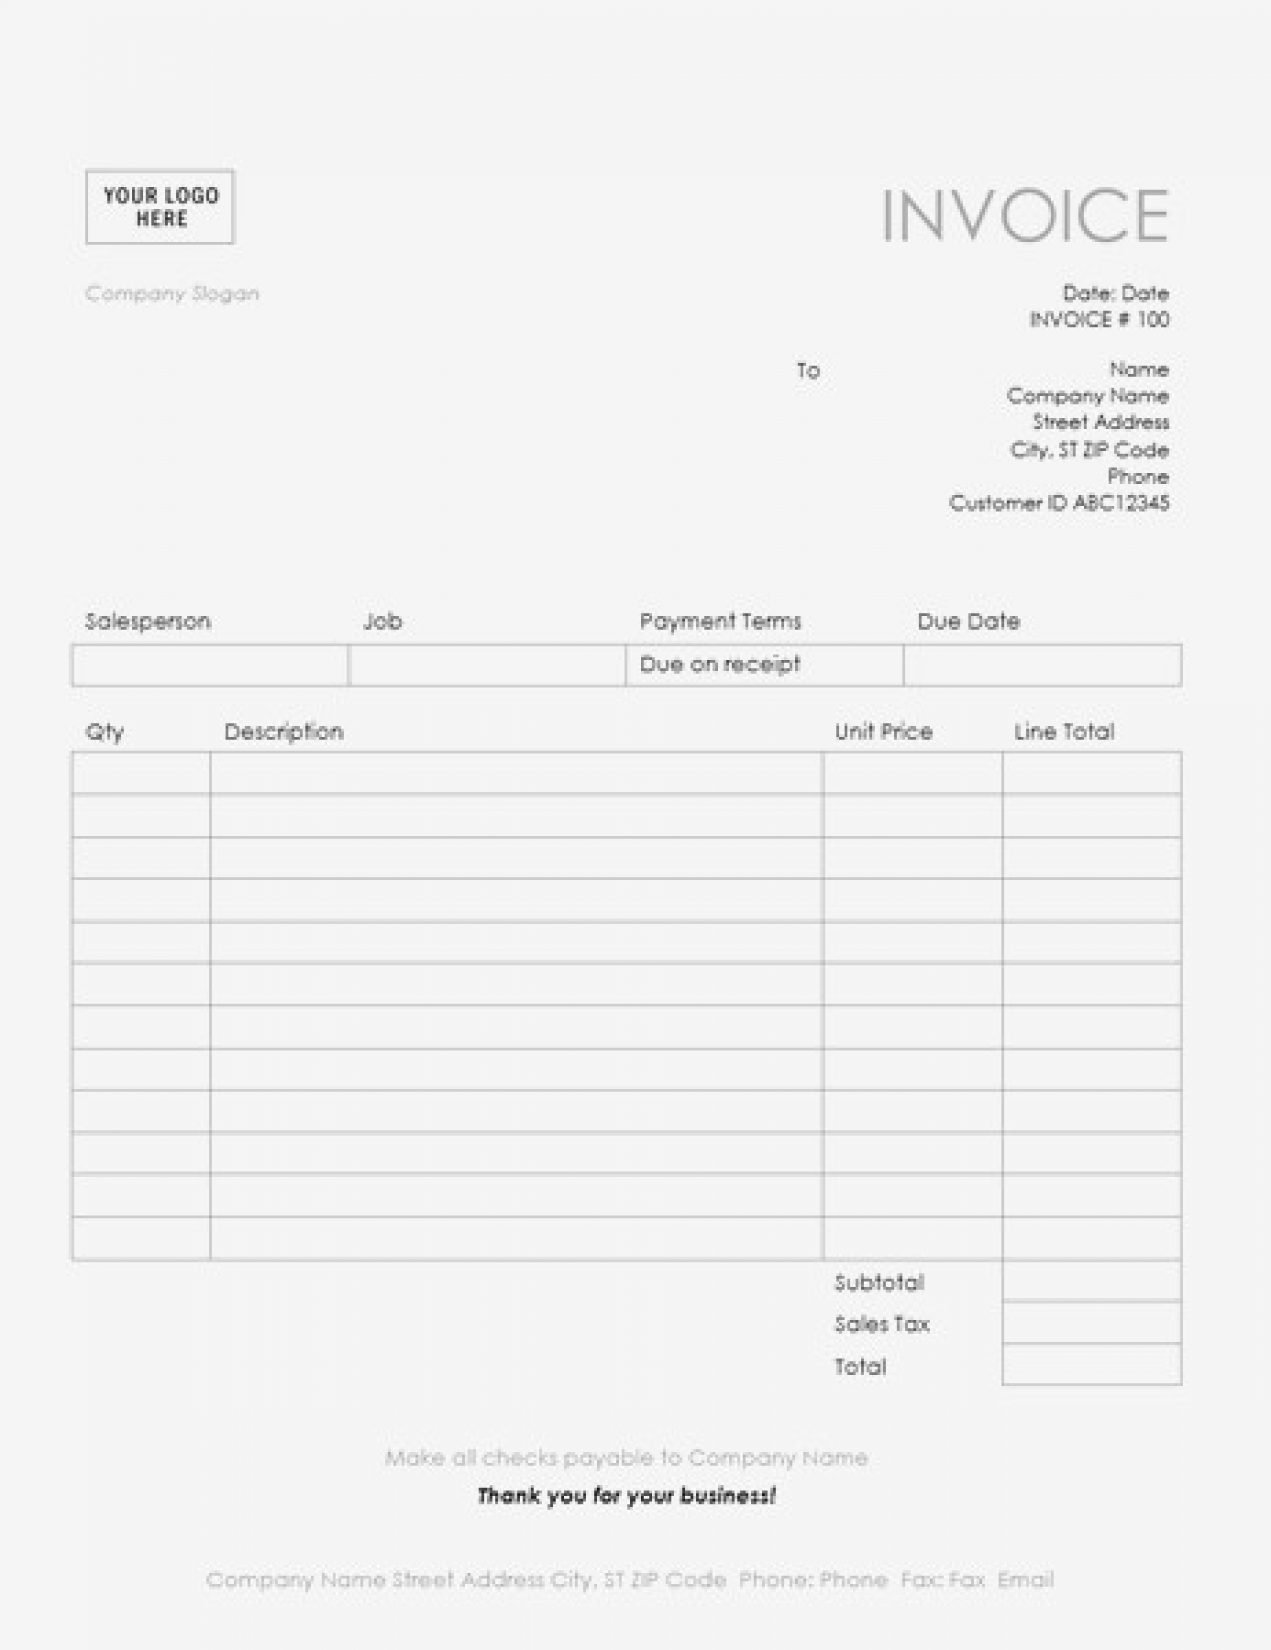 microsoft-word-invoice-template-invoices-office-regarding-templates-in